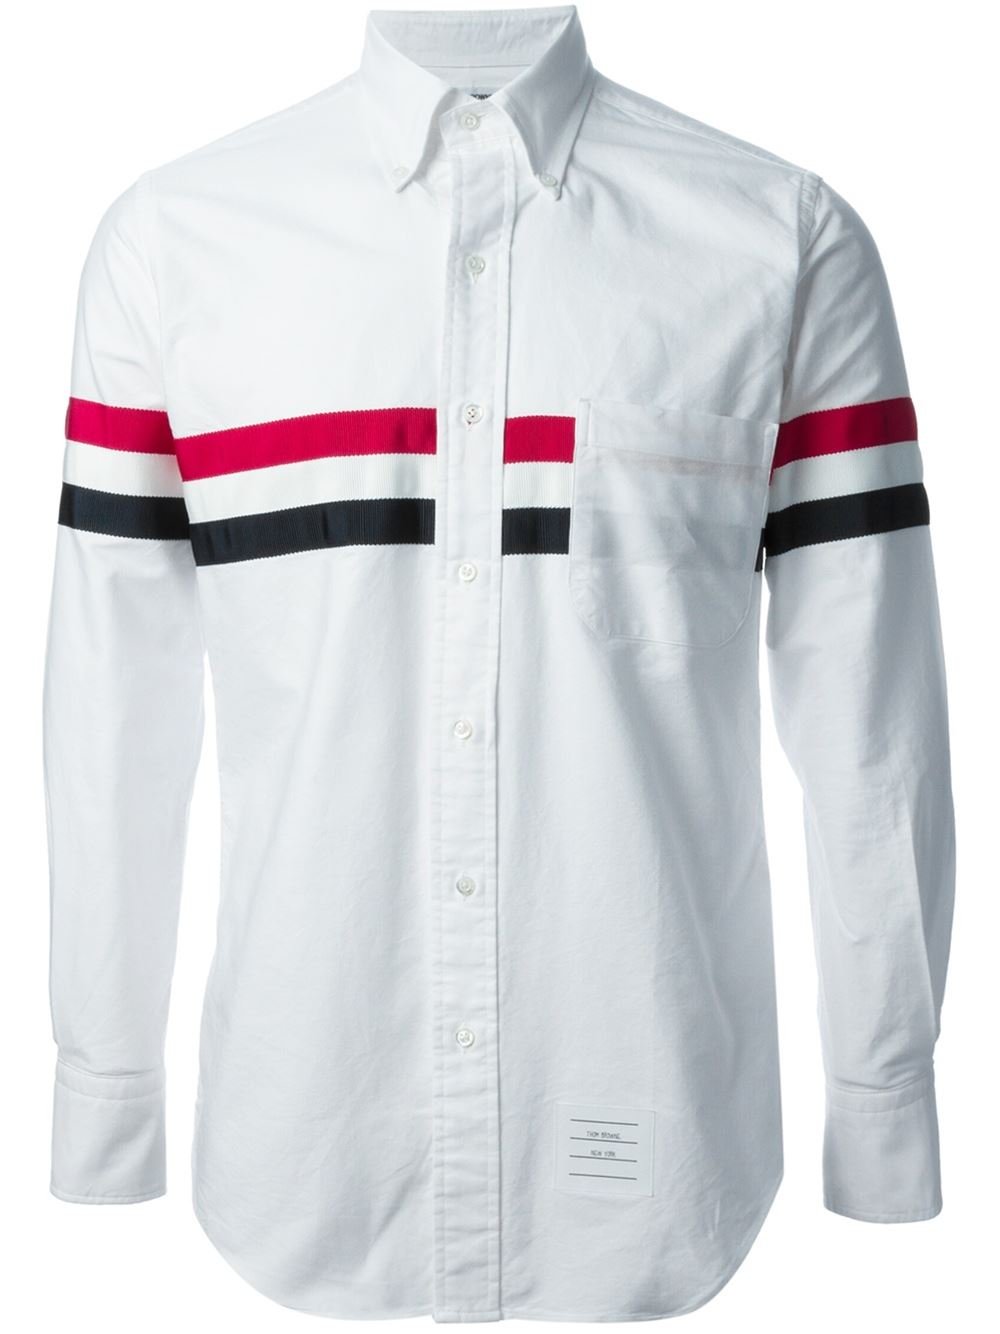 Thom Browne Striped Detail Shirt in White for Men - Lyst